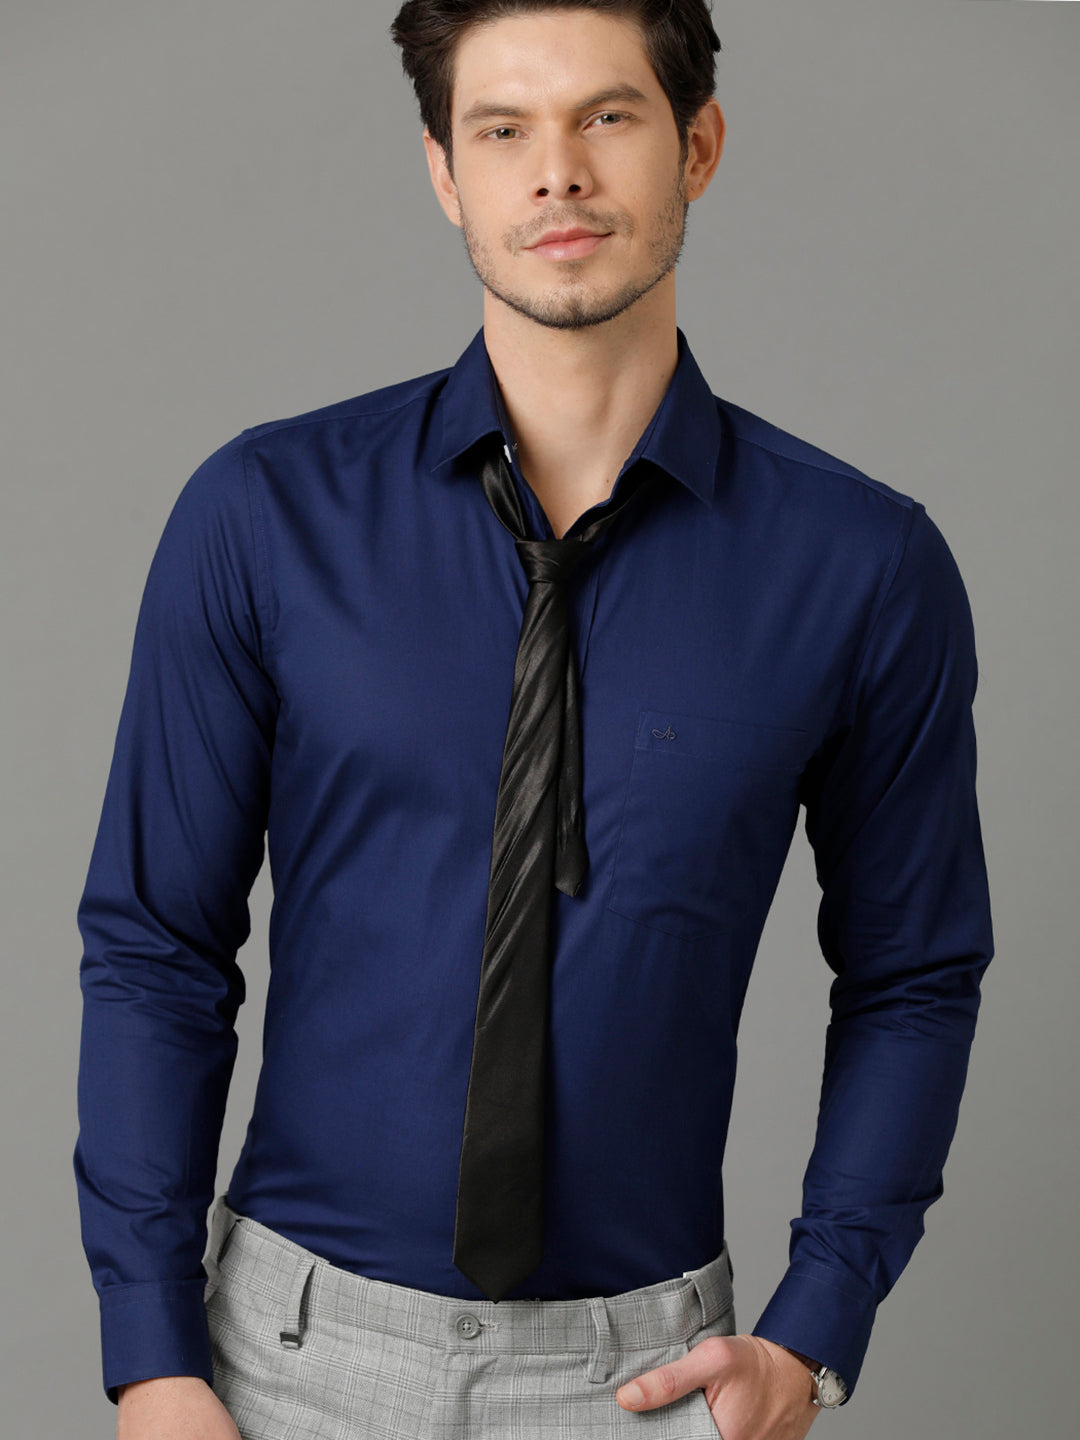 Mens Slim Fit Solid Navy Blue Formal Cotton Shirt (CODEY)